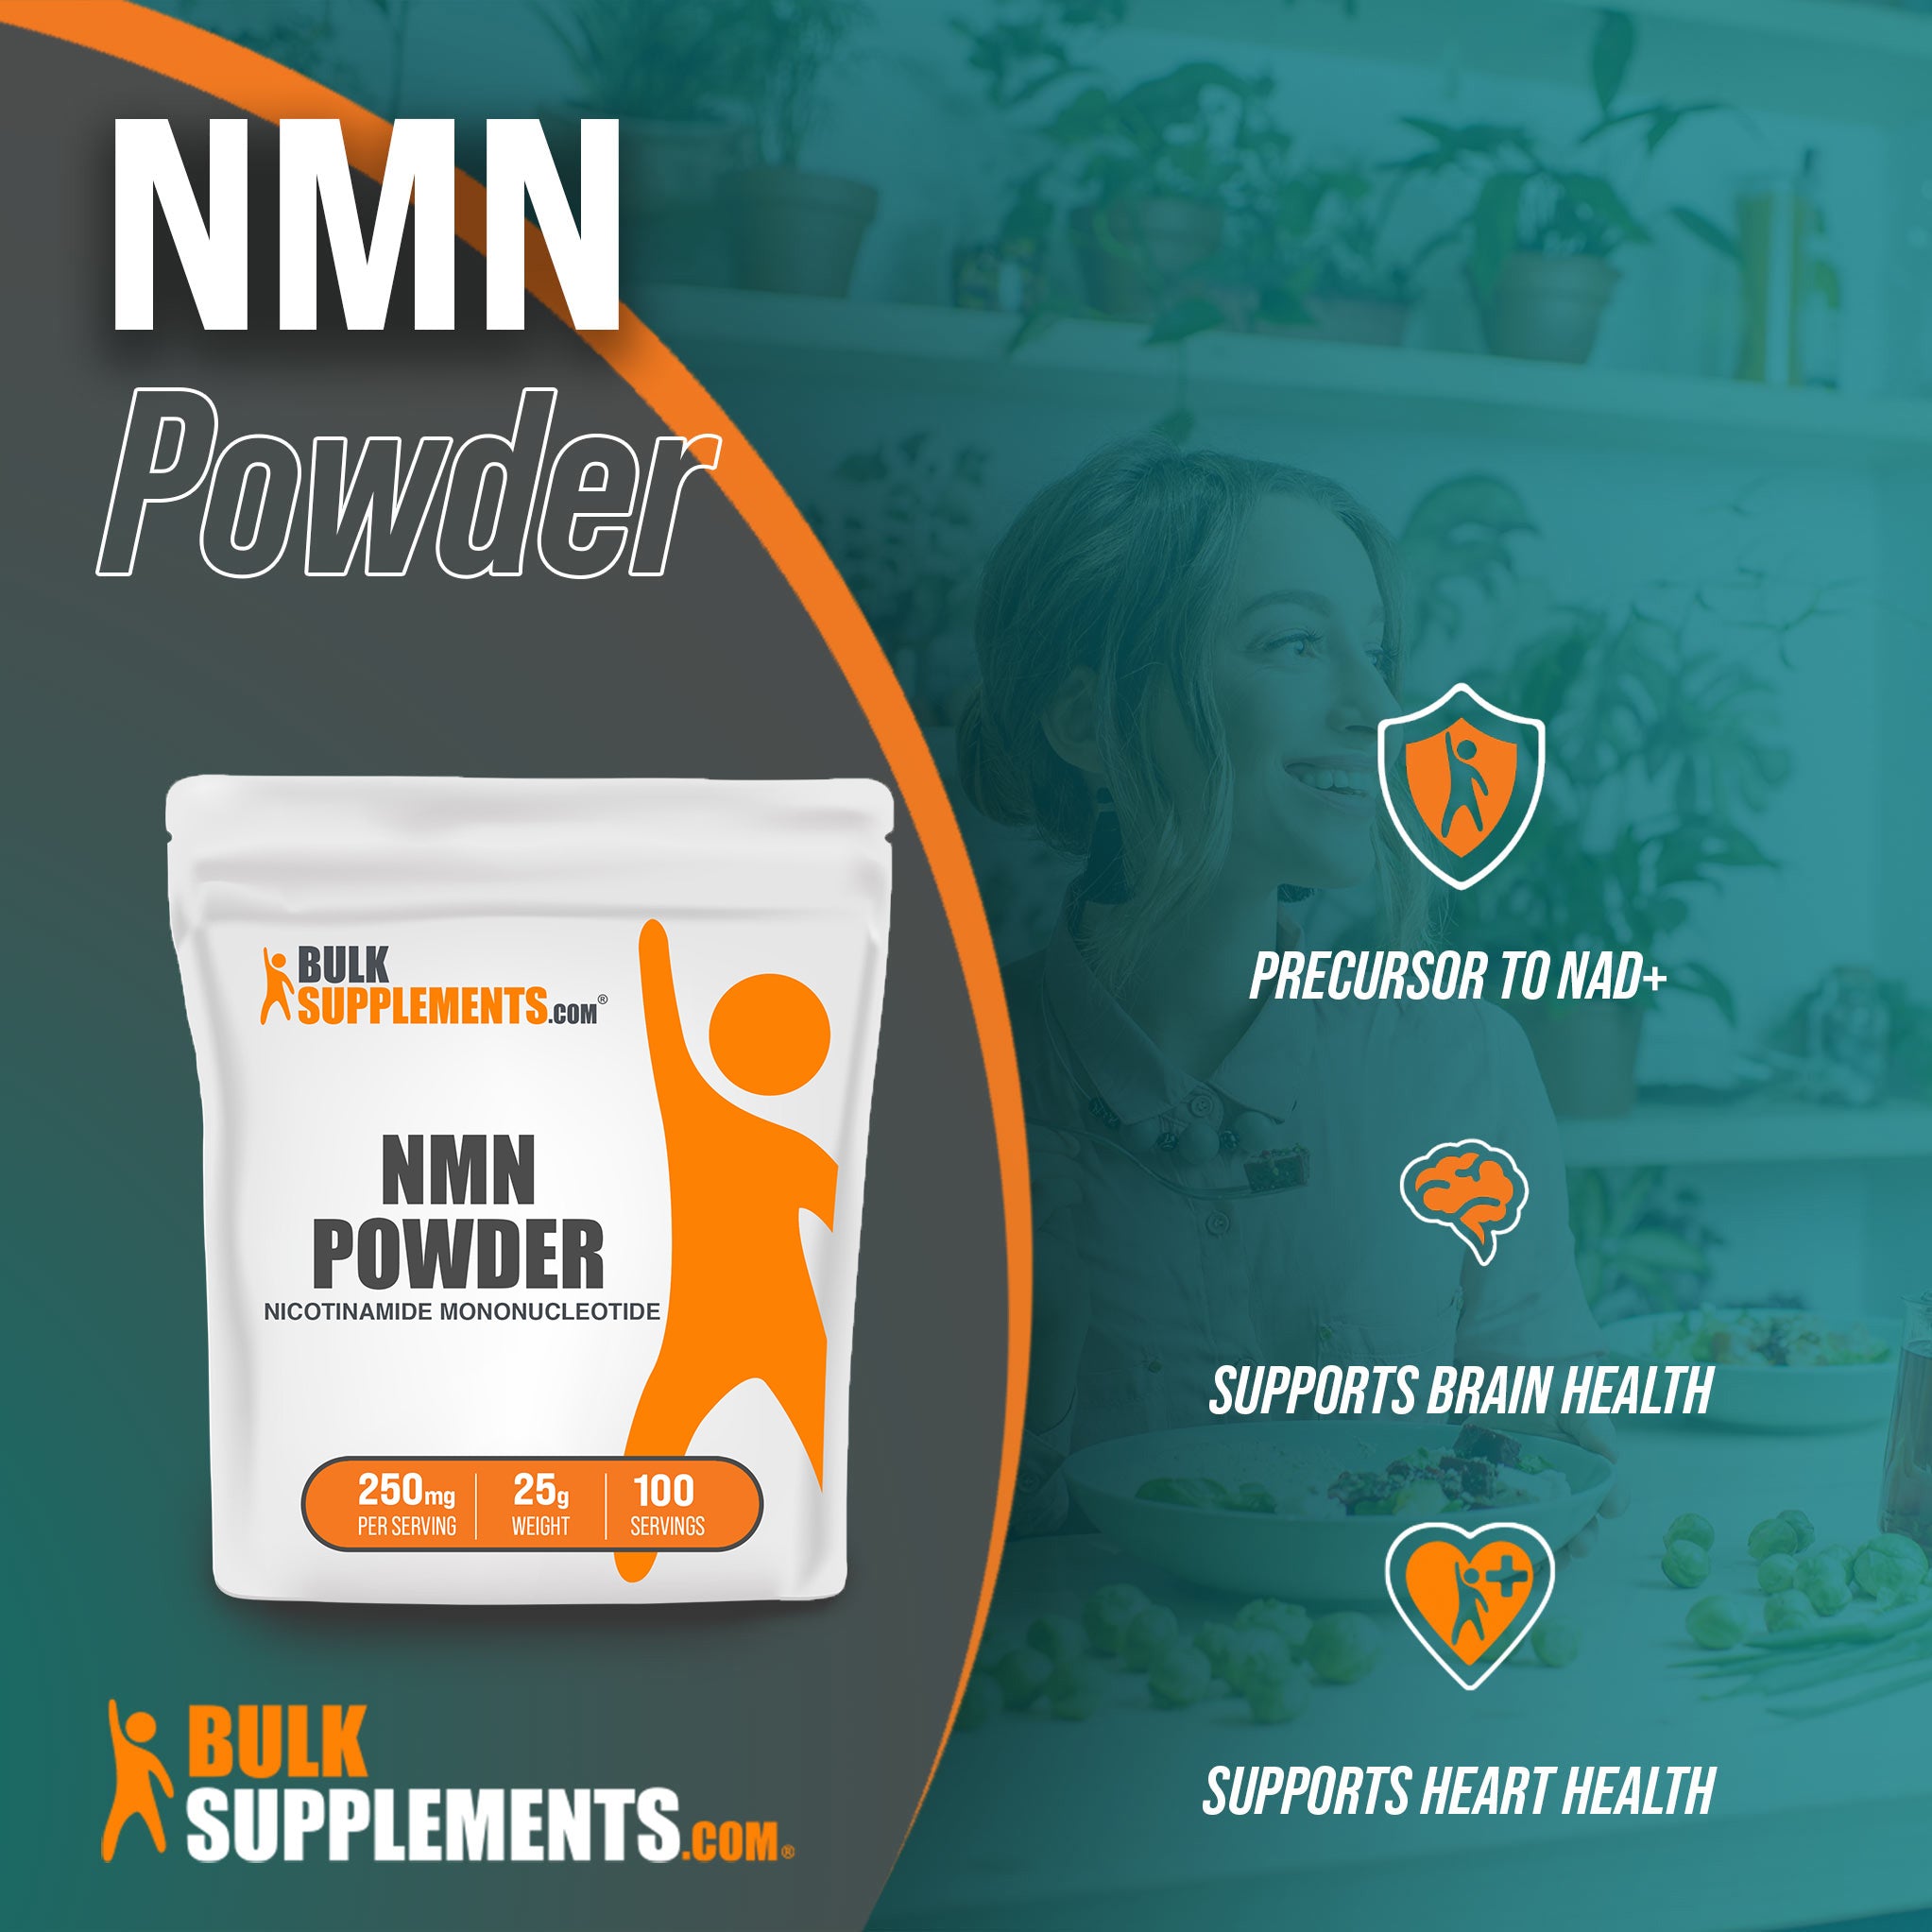 Benefits of NMN: precursor to NAD+, supports brain health, supports heart health